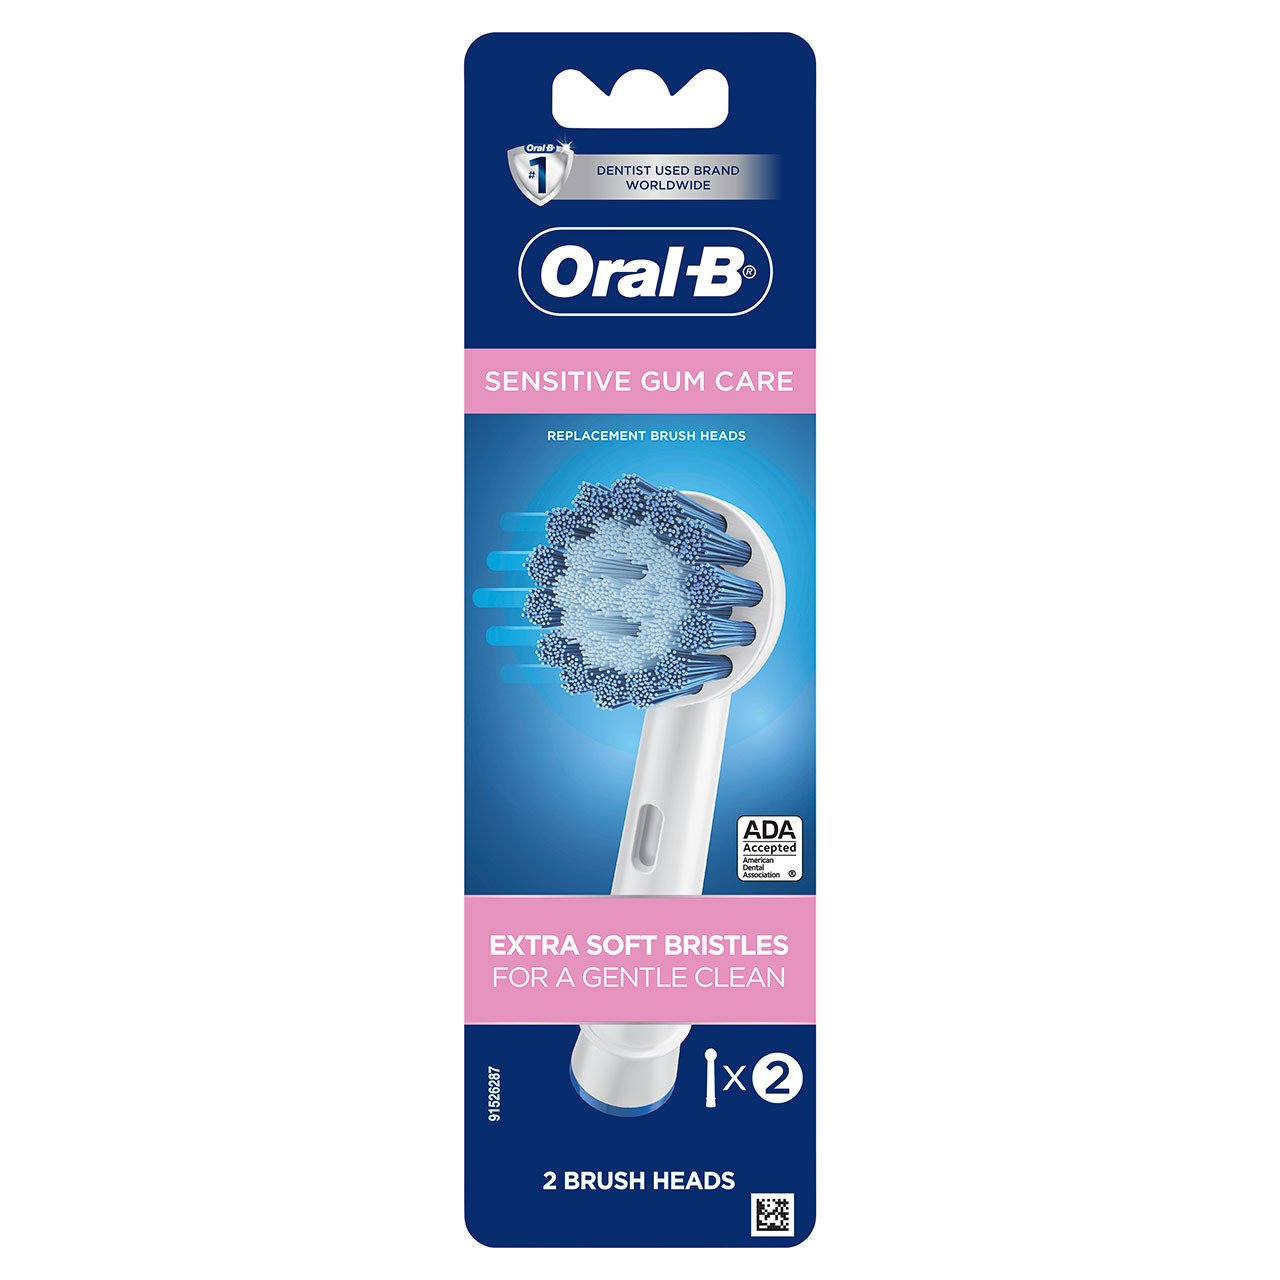 Oral B Sensitive Gum Care Brush Heads: Gentle Cleaning